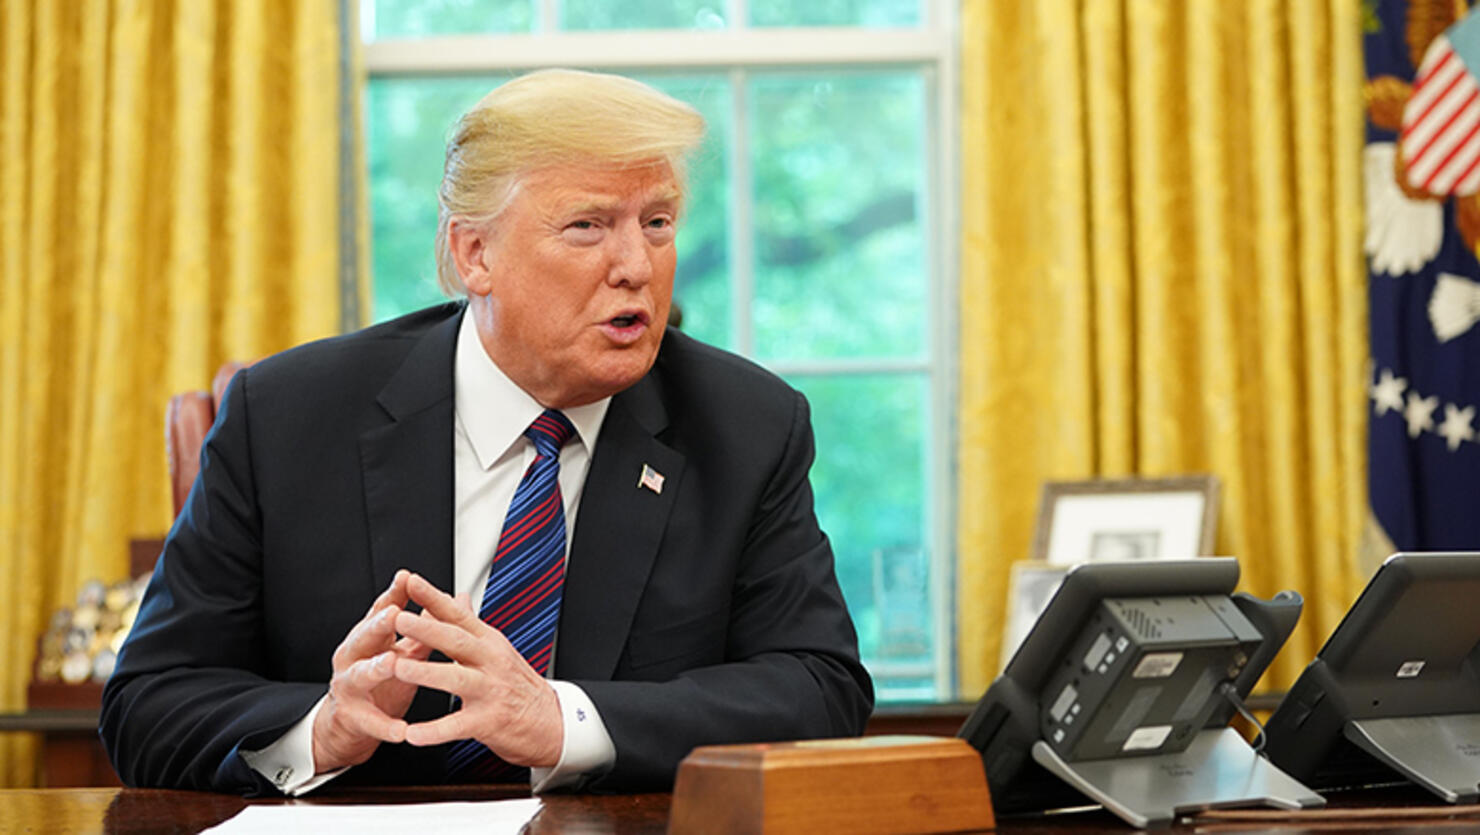 US President Donald Trump speaks in the Oval Office at the White House on August 27, 2018 in Washington,DC.